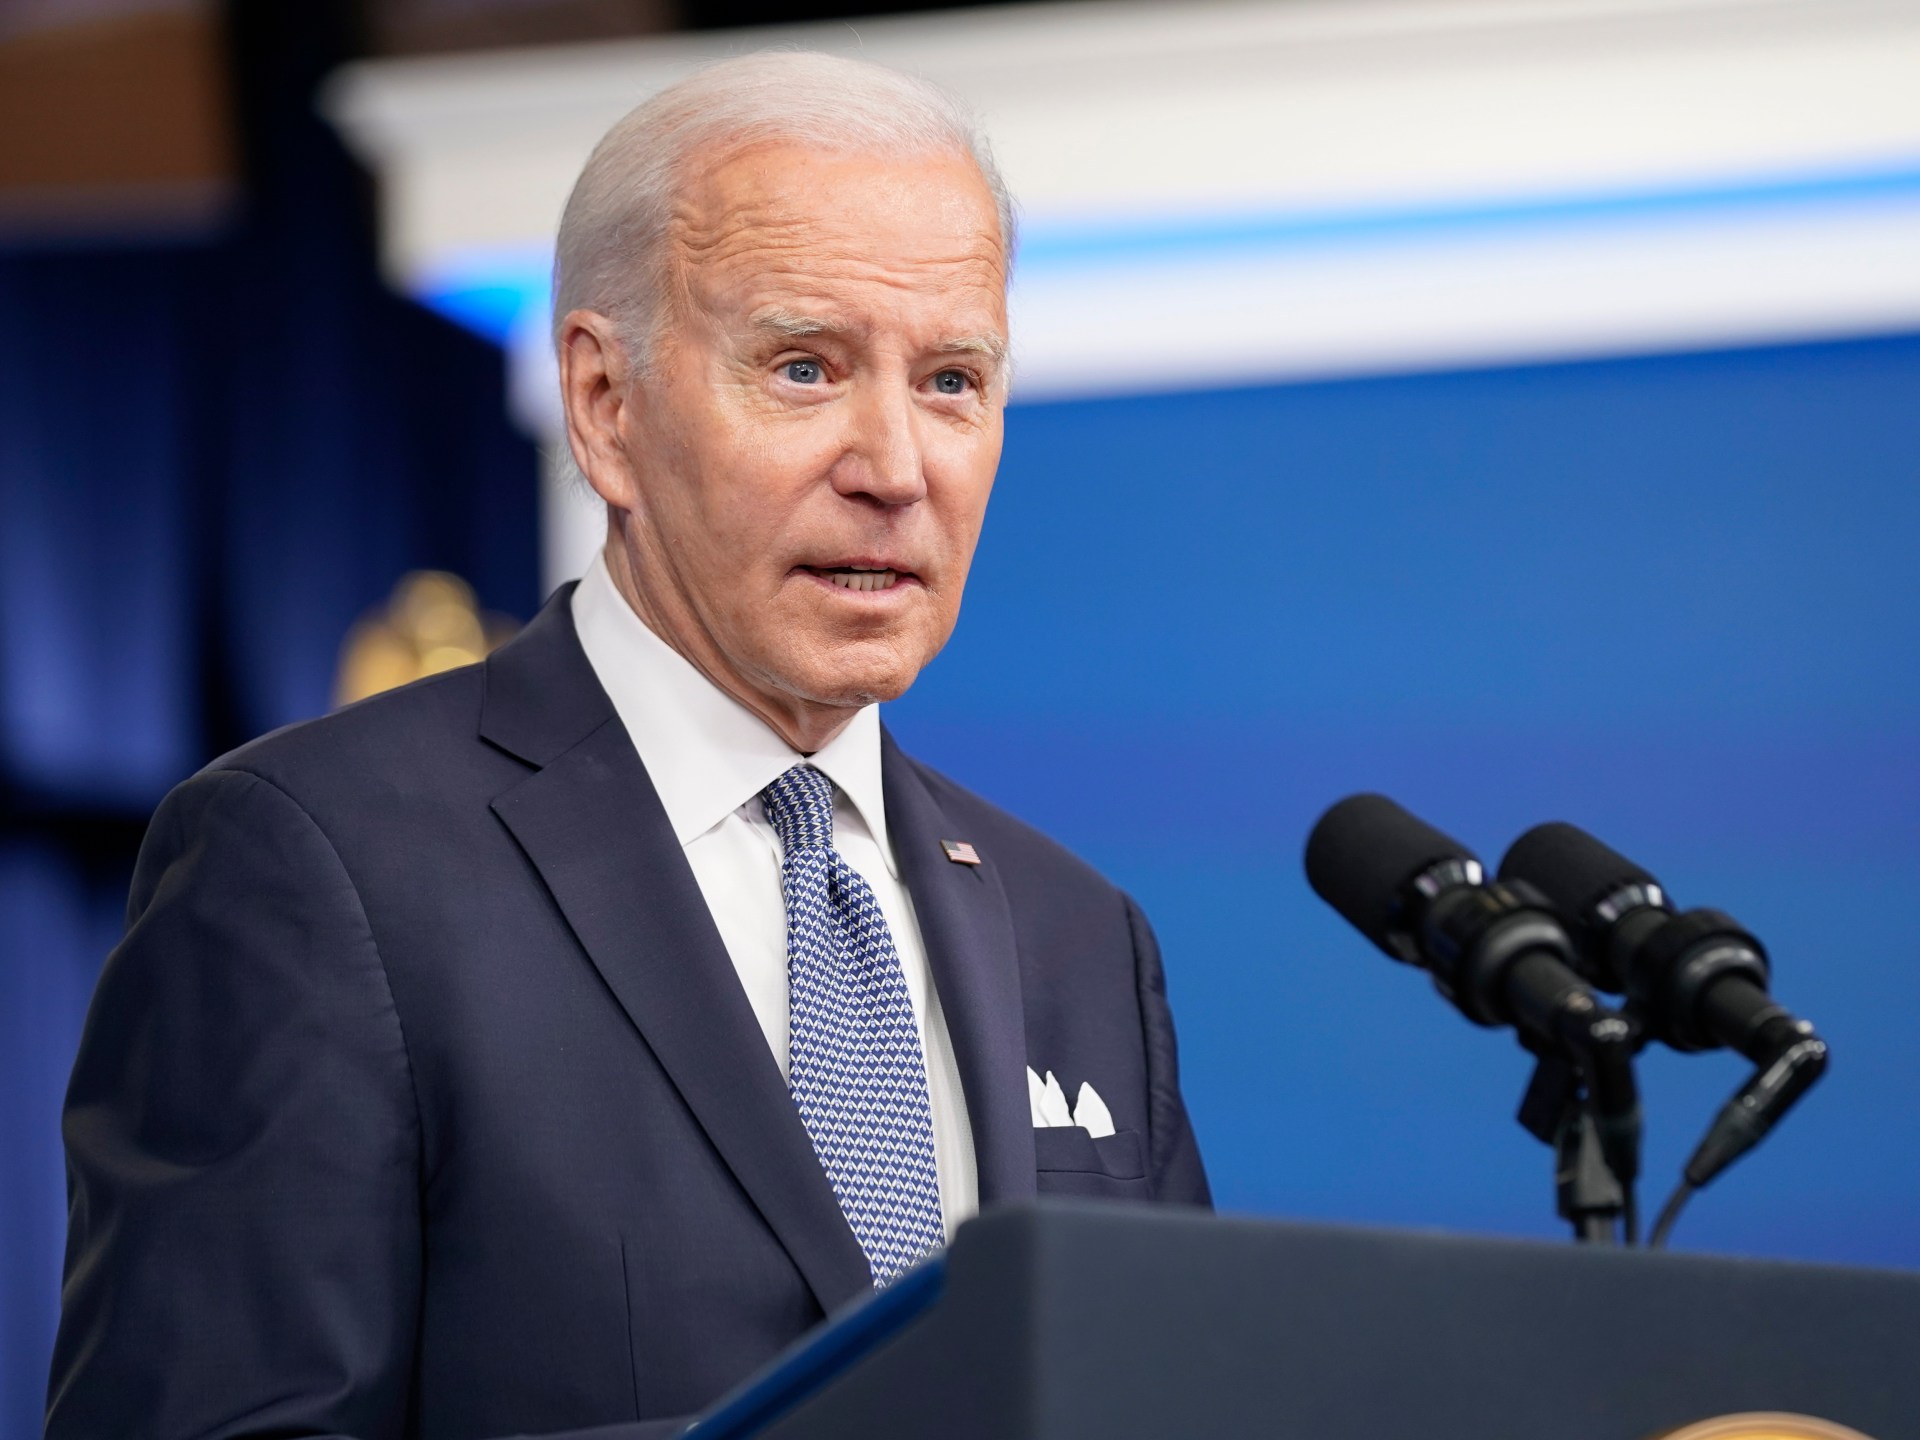 Extra categorised information discovered at Biden’s house: White Home